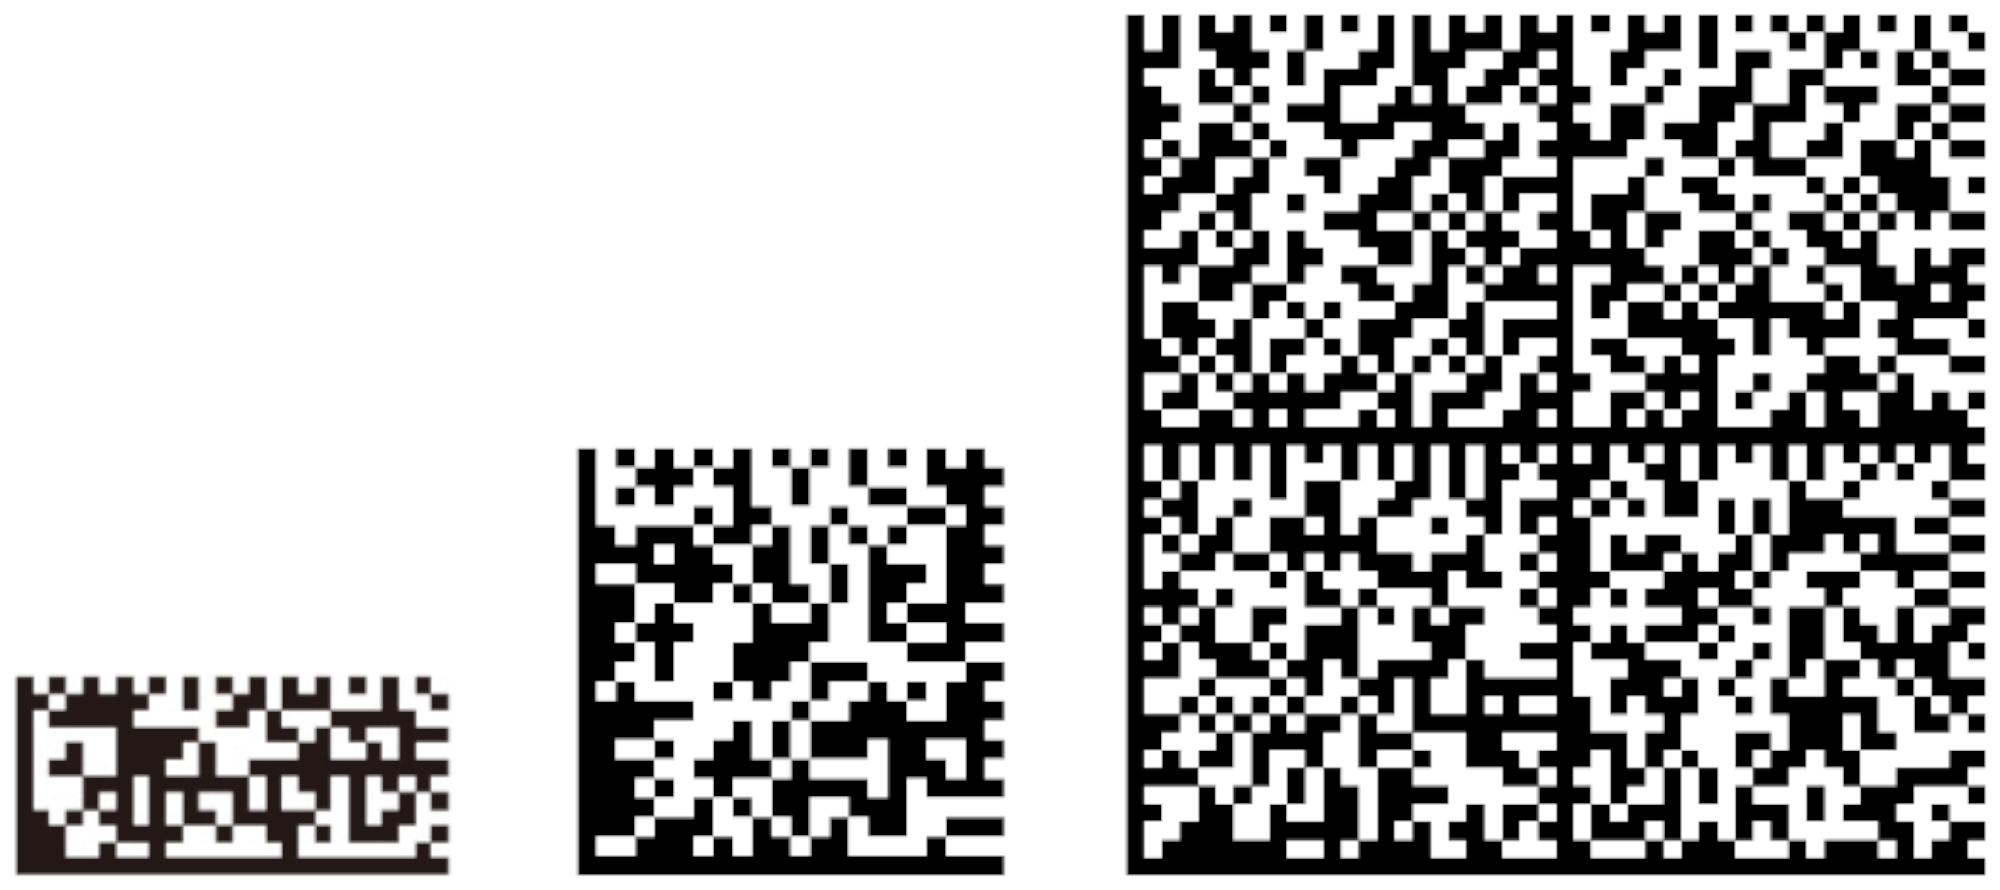 Some examples of DataMatrix codes. From left to right: rectangular DataMatrix code, square DataMatrix code and four square DataMatrix combined. Each of them can store up to 14, 28, 202 bytes, respectively, using approximately a 20% of error correction capacity. 